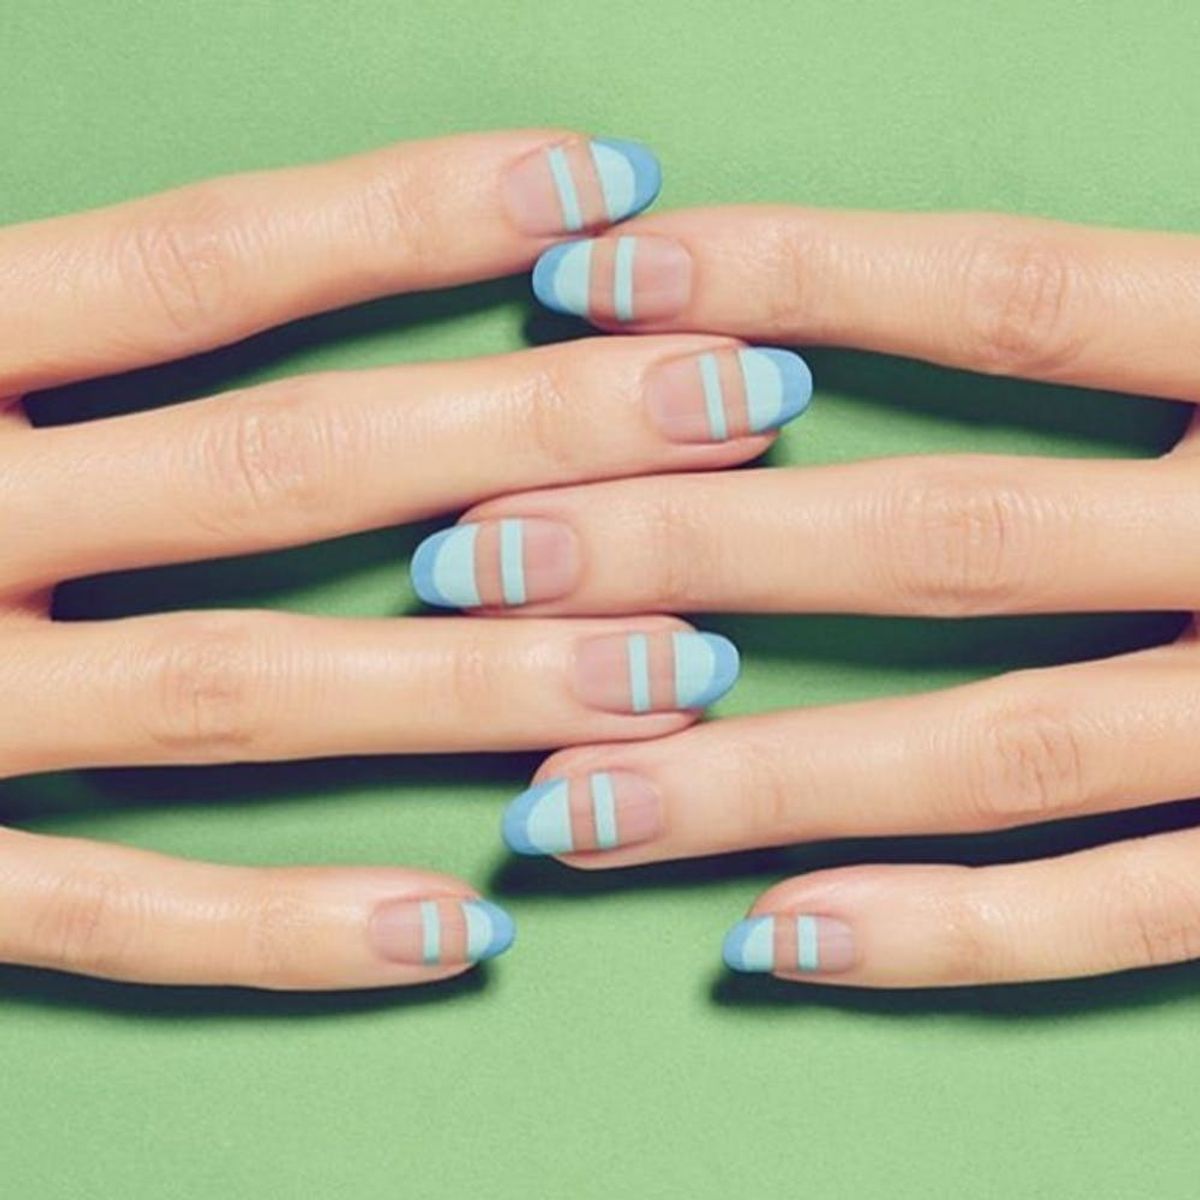 10 Two-Tone Manis That’ll Take Your French Manicure to the NEXT Level